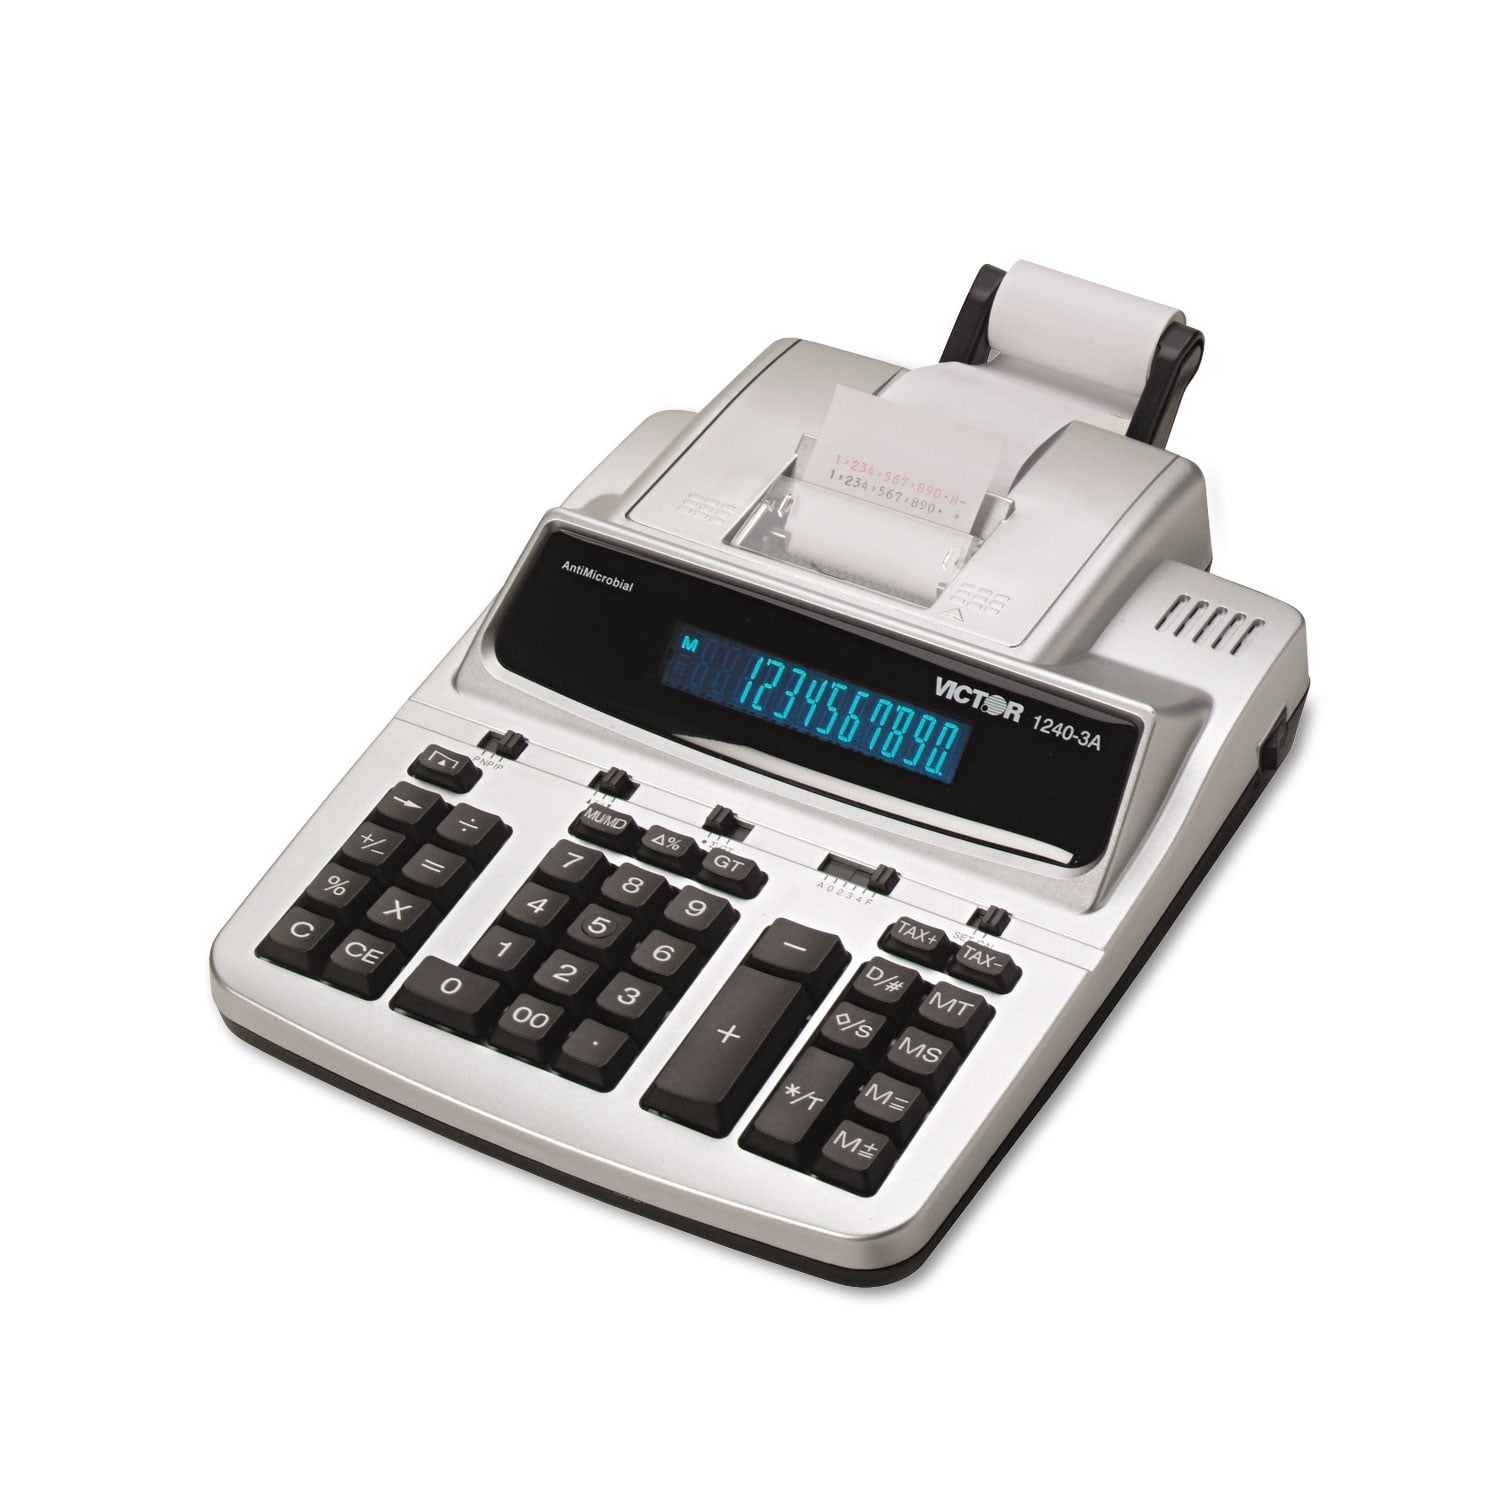 Victor 1240-3A Printing Calculator for sale online 